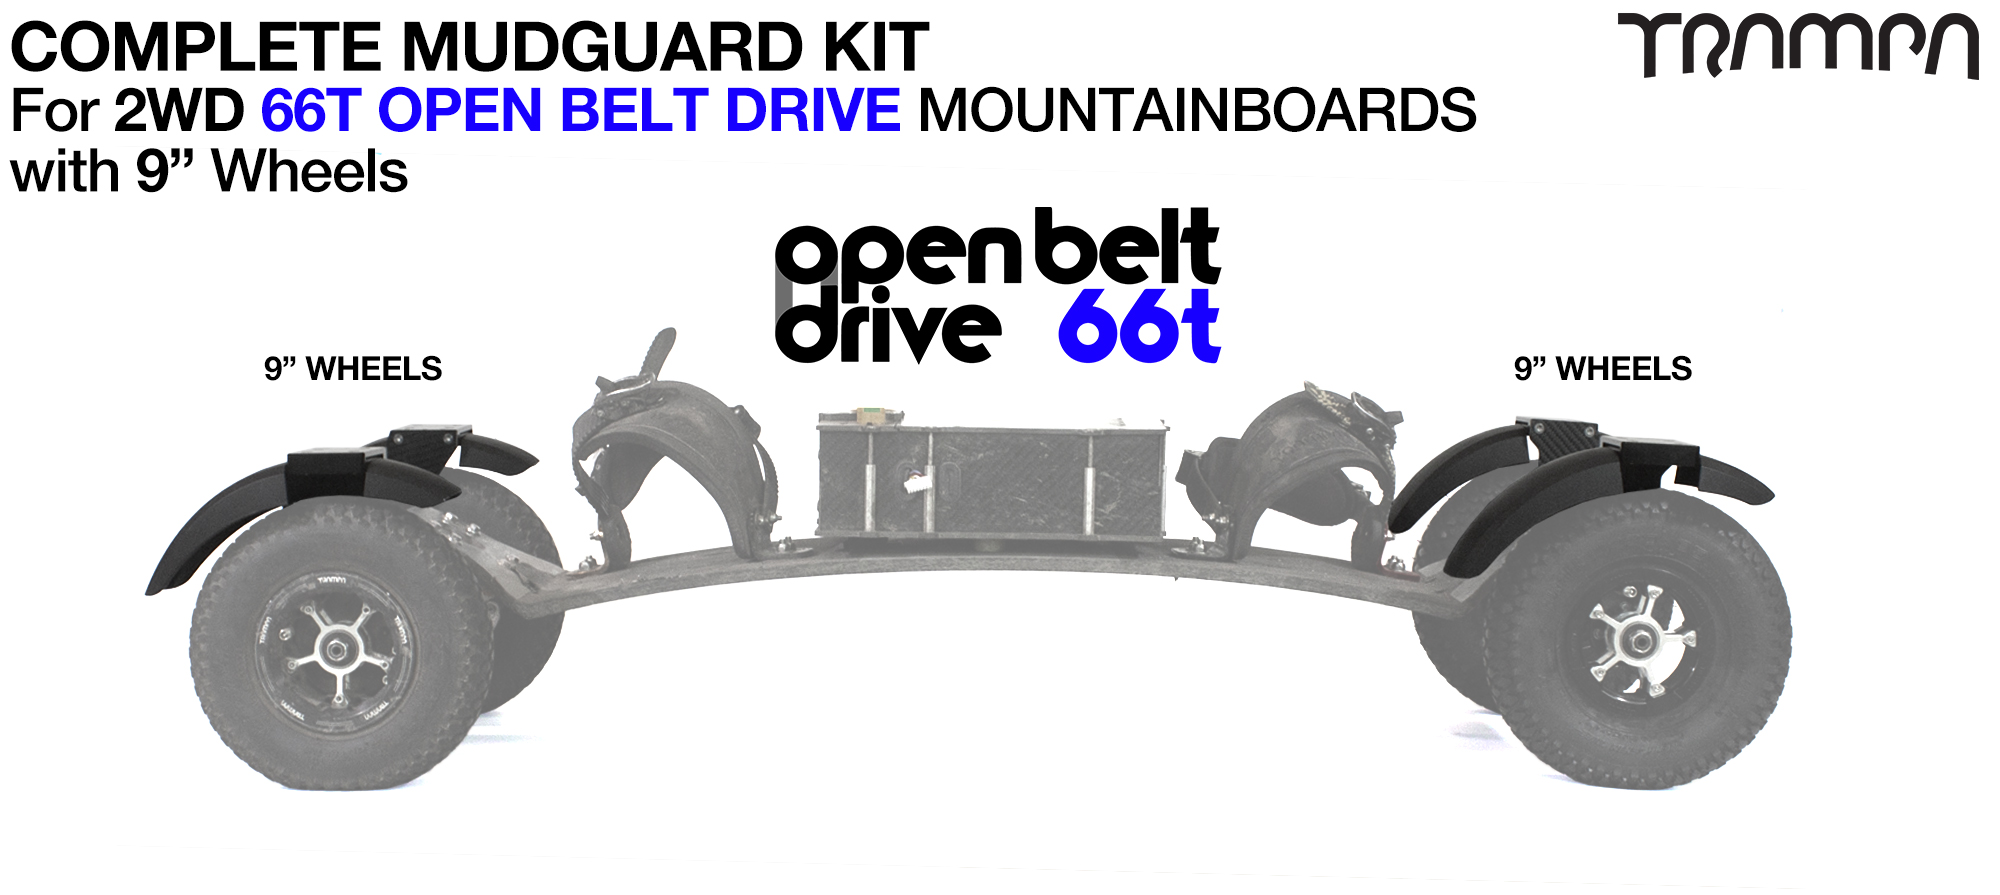 Full Mudguard Kit for 2WD 66T OPEN BELT DRIVE Mountainboards - 9" Wheels All round